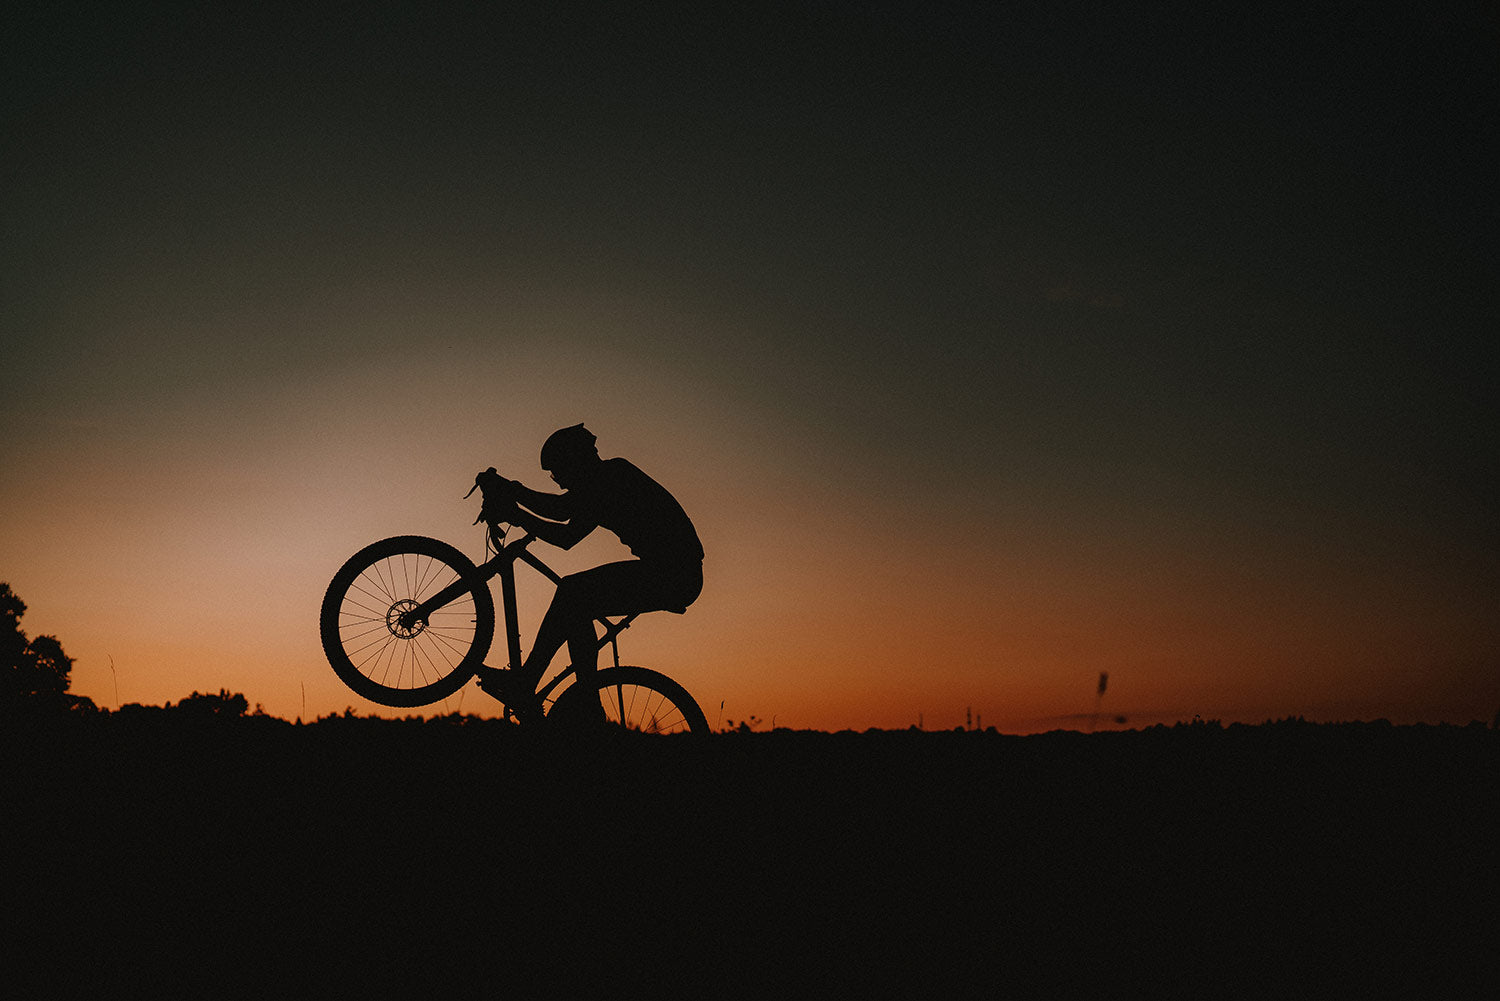 Cyclist in Silhouette doing a wheely